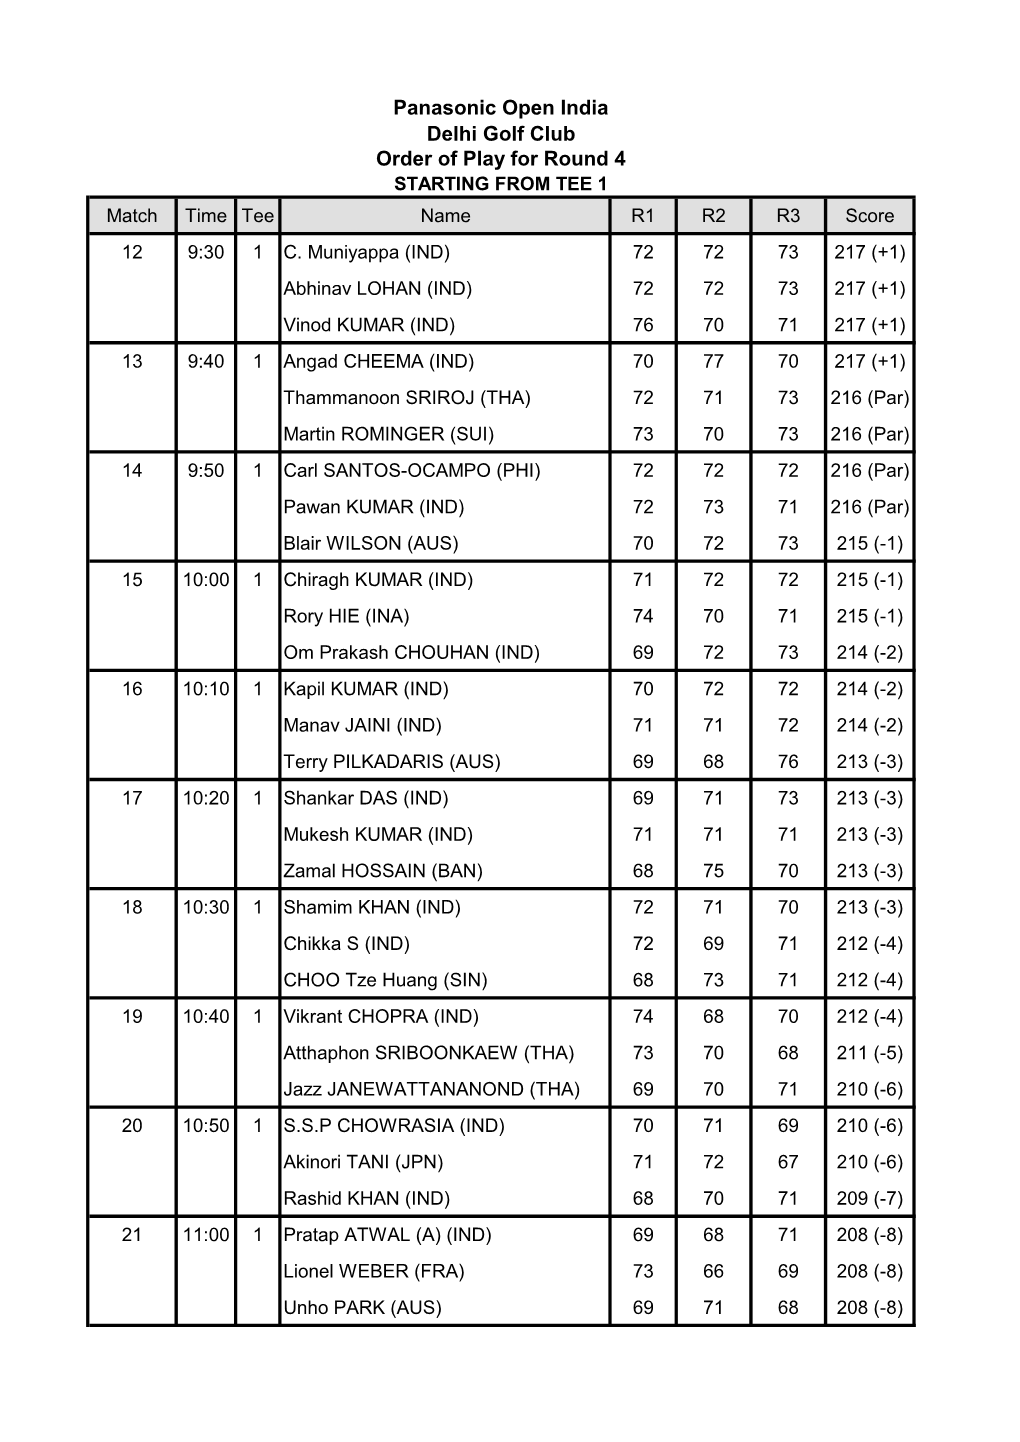 Panasonic Open India Delhi Golf Club Order of Play for Round 4 STARTING from TEE 1 Match Time Tee Name R1 R2 R3 Score 12 9:30 1 C